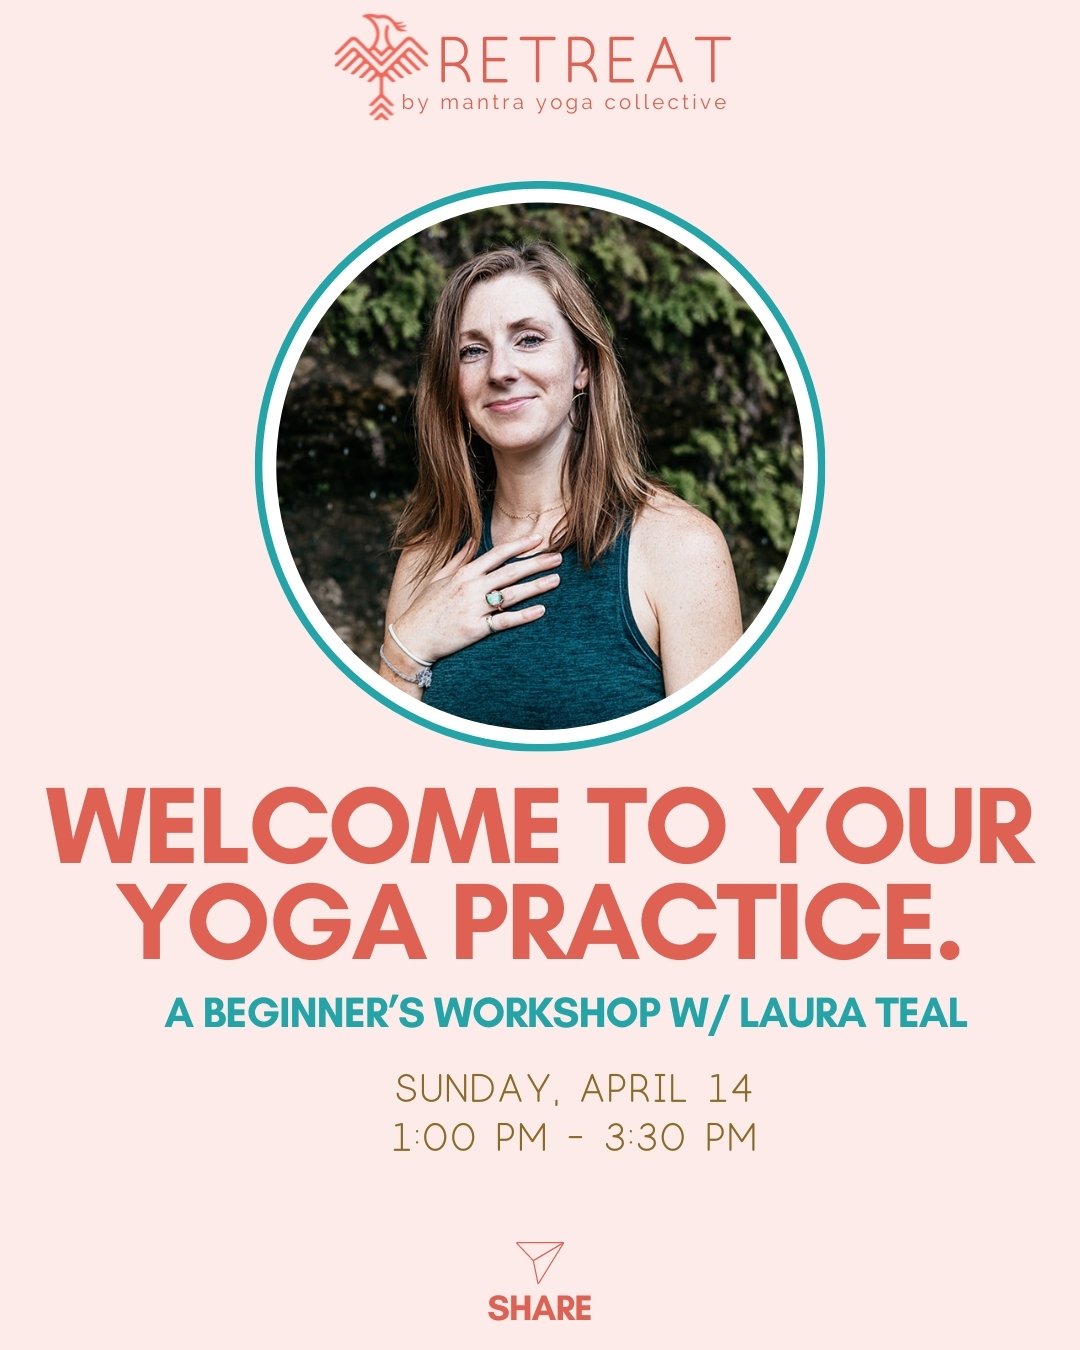 Start your yoga practice THIS Sunday with our co-founder Laura &mdash; a master of breaking down this beloved practice of ours so it's accessible to *all*. 

You'll walking away having learned: 
🧘&zwj;♀️ The names of foundational yoga postures
🧘&zw